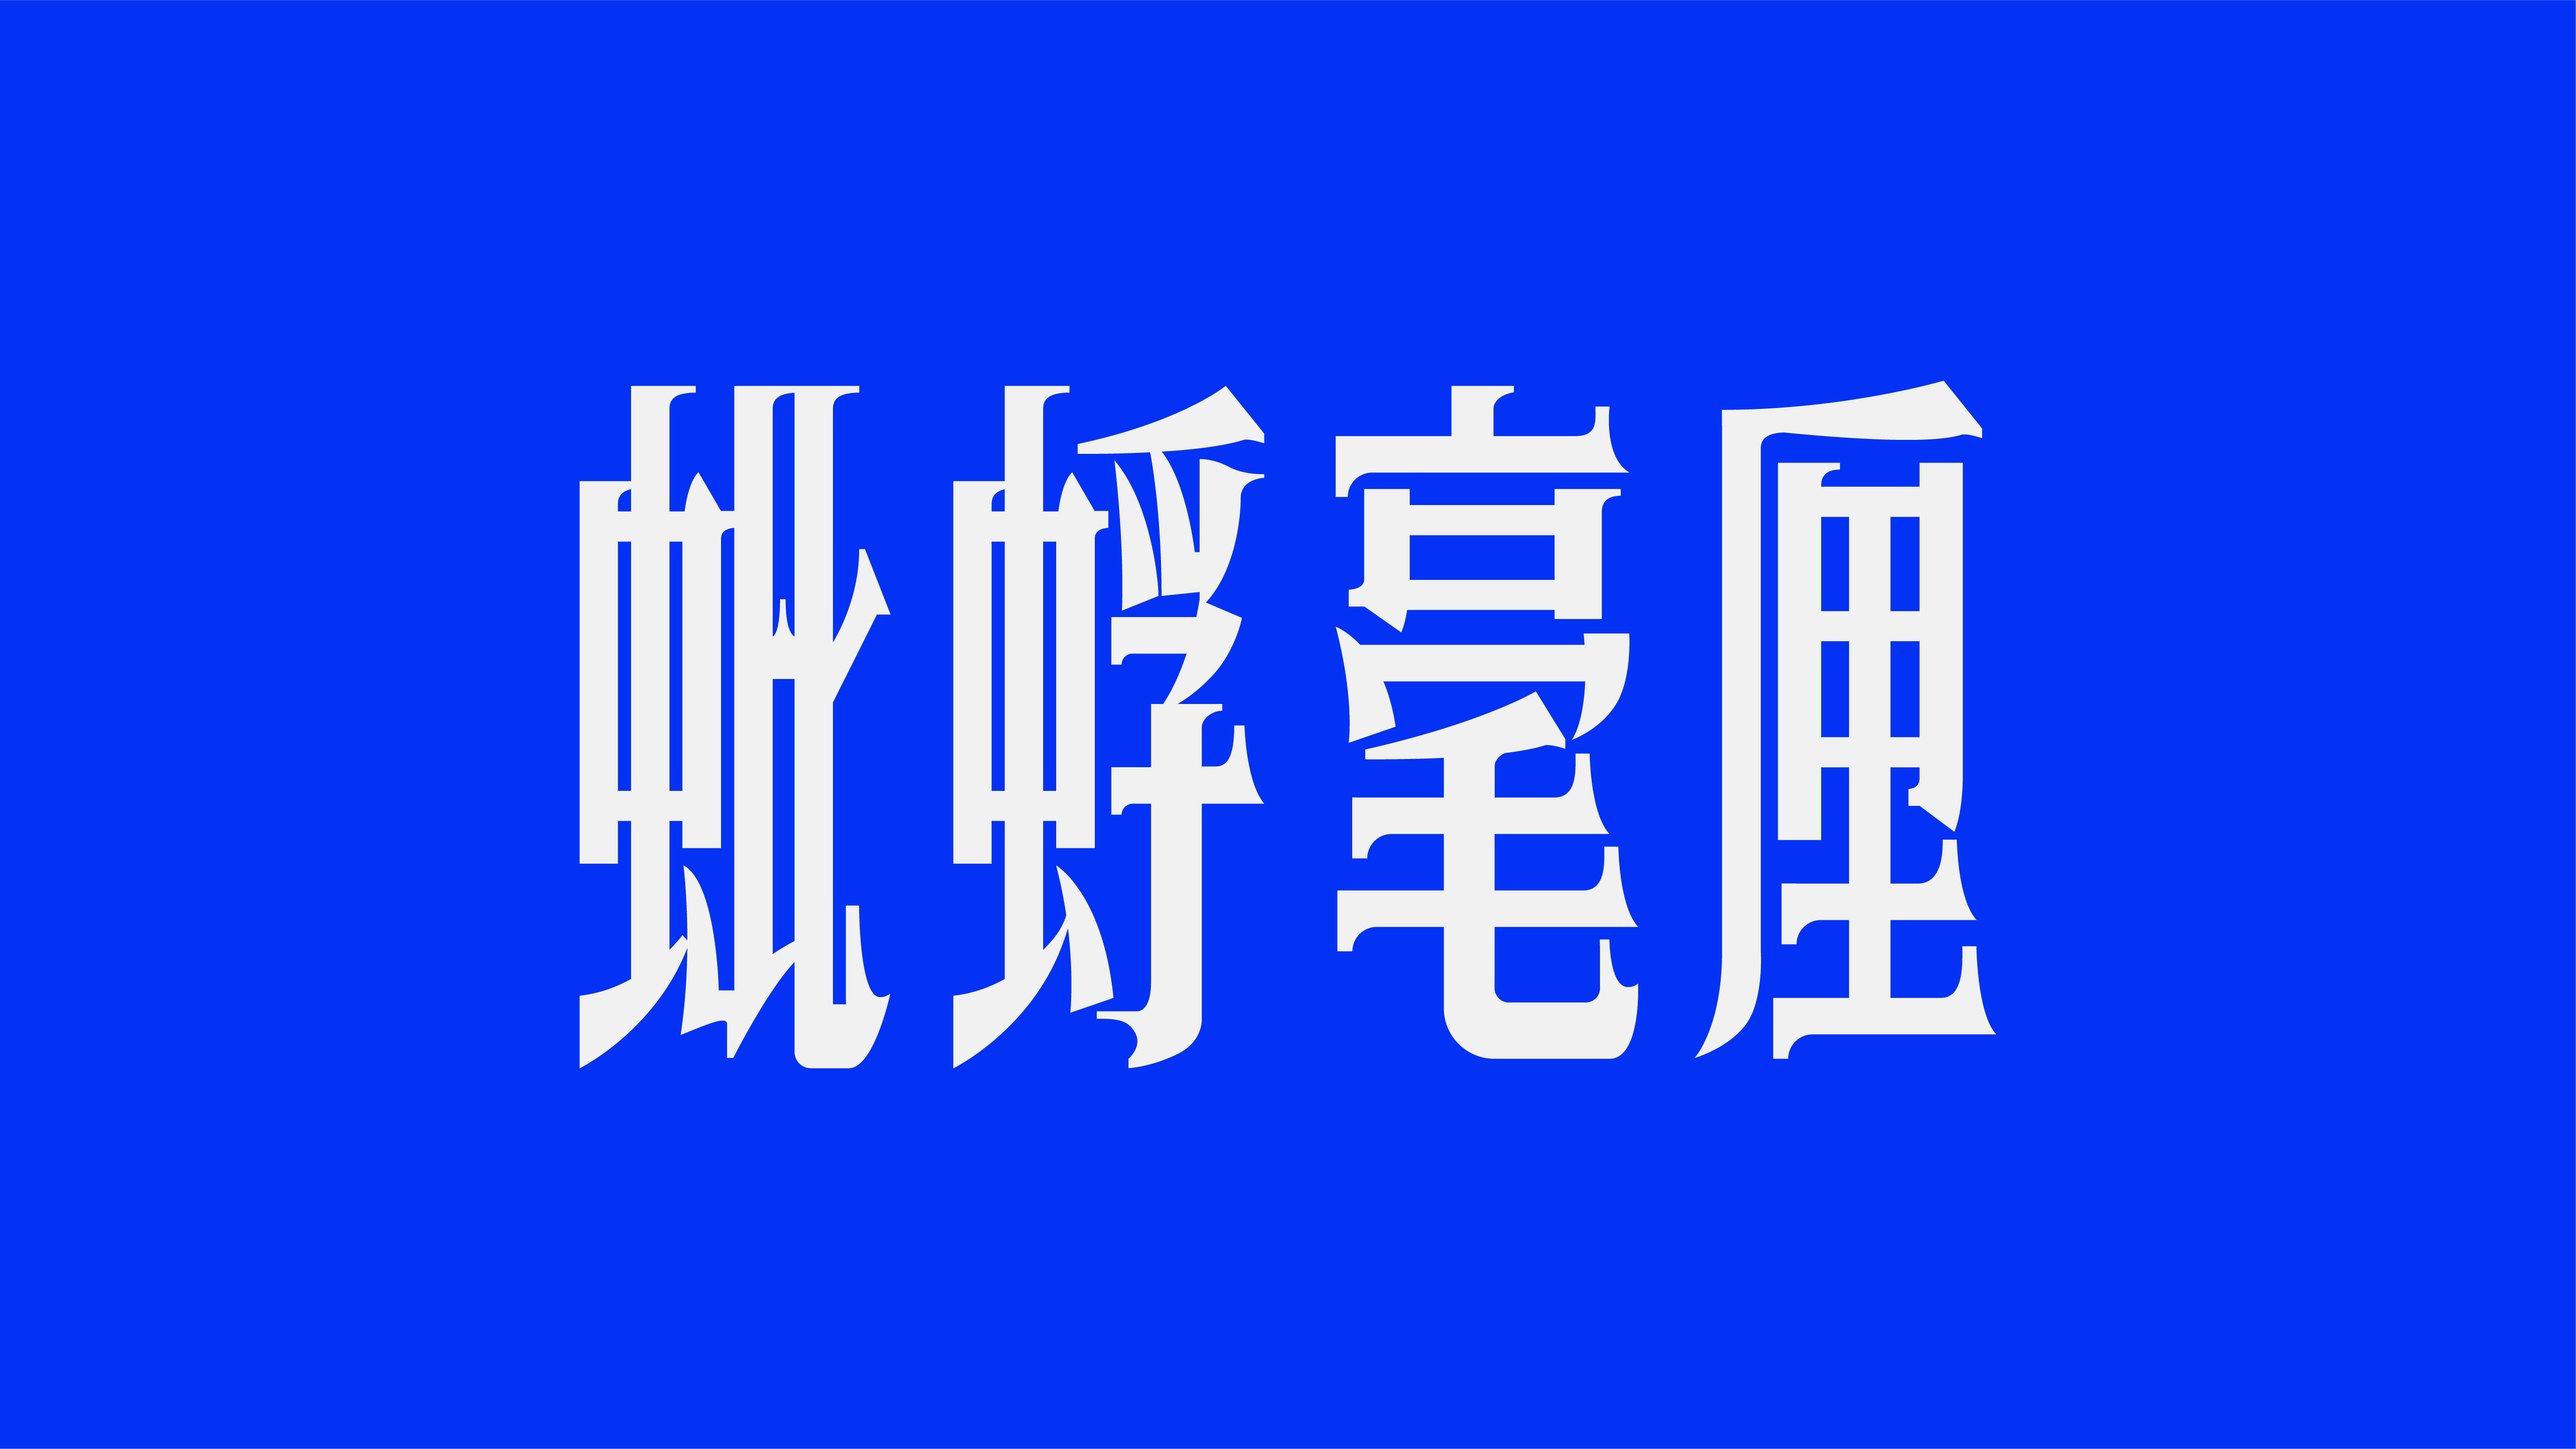 28p The latest collection of Chinese fonts #29